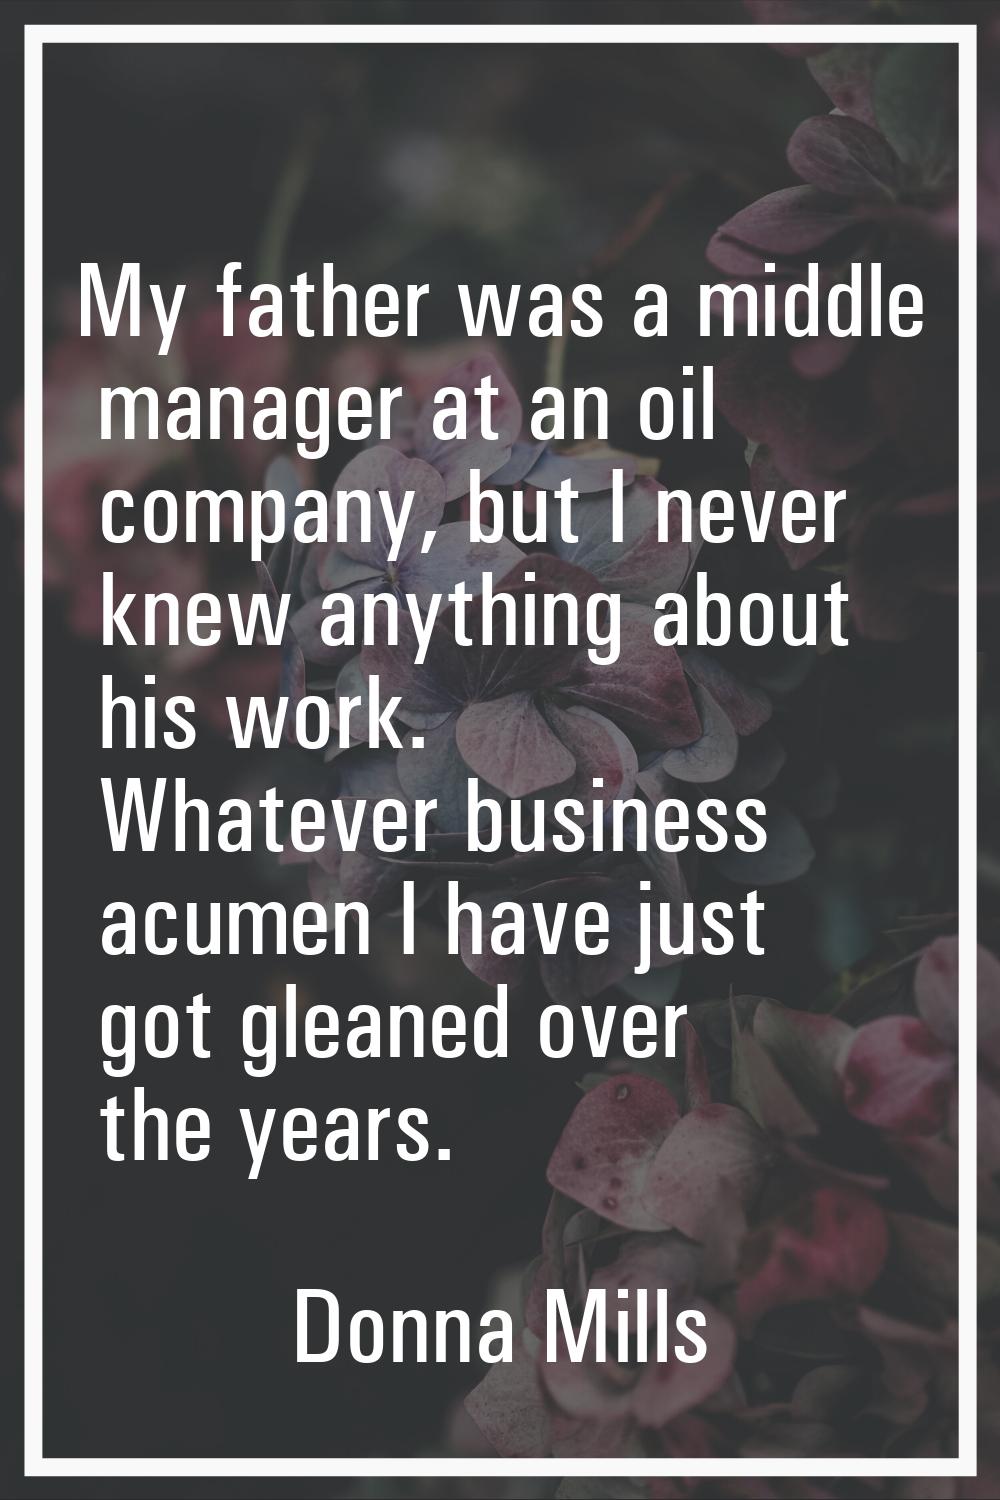 My father was a middle manager at an oil company, but I never knew anything about his work. Whateve